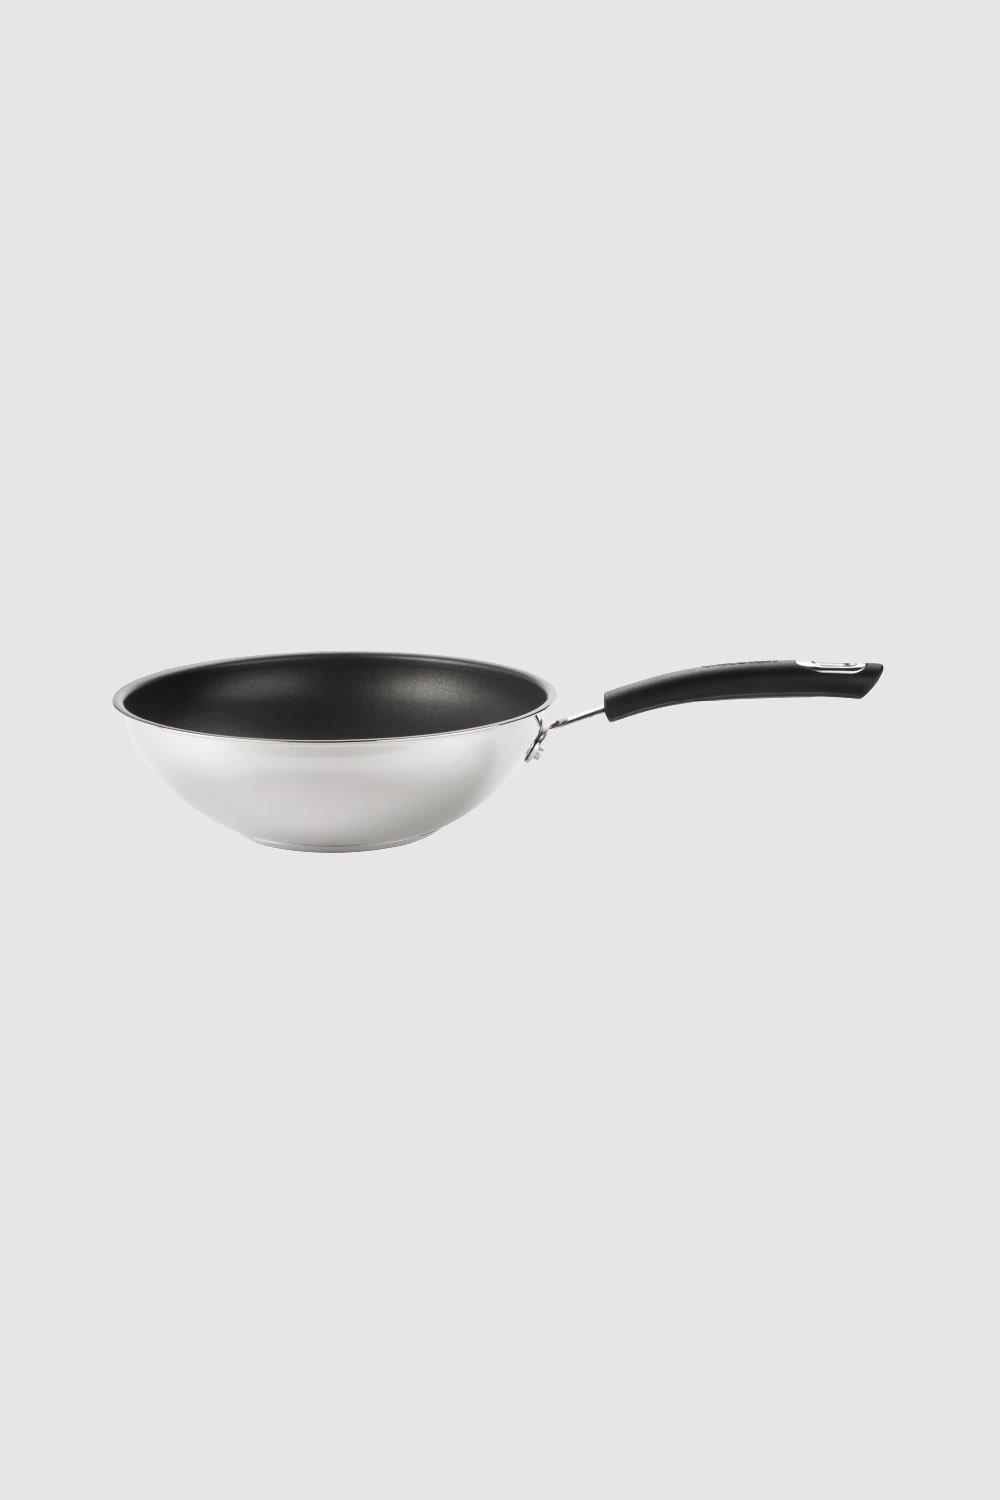 Total Stainless Steel Non Stick Wok 26cm, Induction Base, Dishwasher Safe